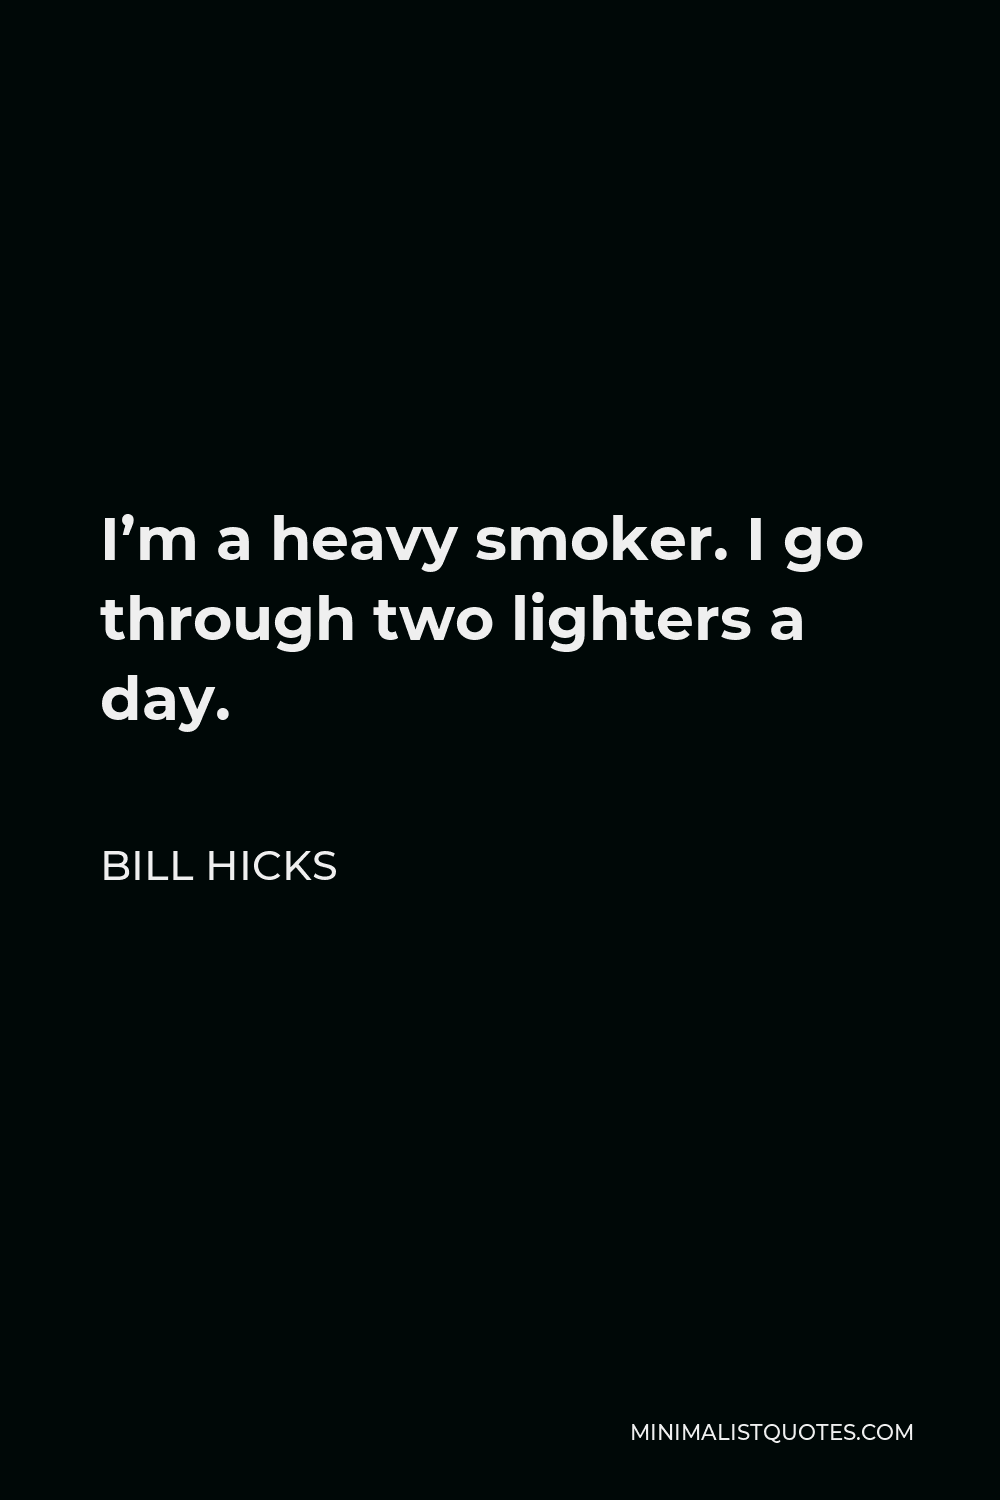 Bill Hicks Quote - I’m a heavy smoker. I go through two lighters a day.